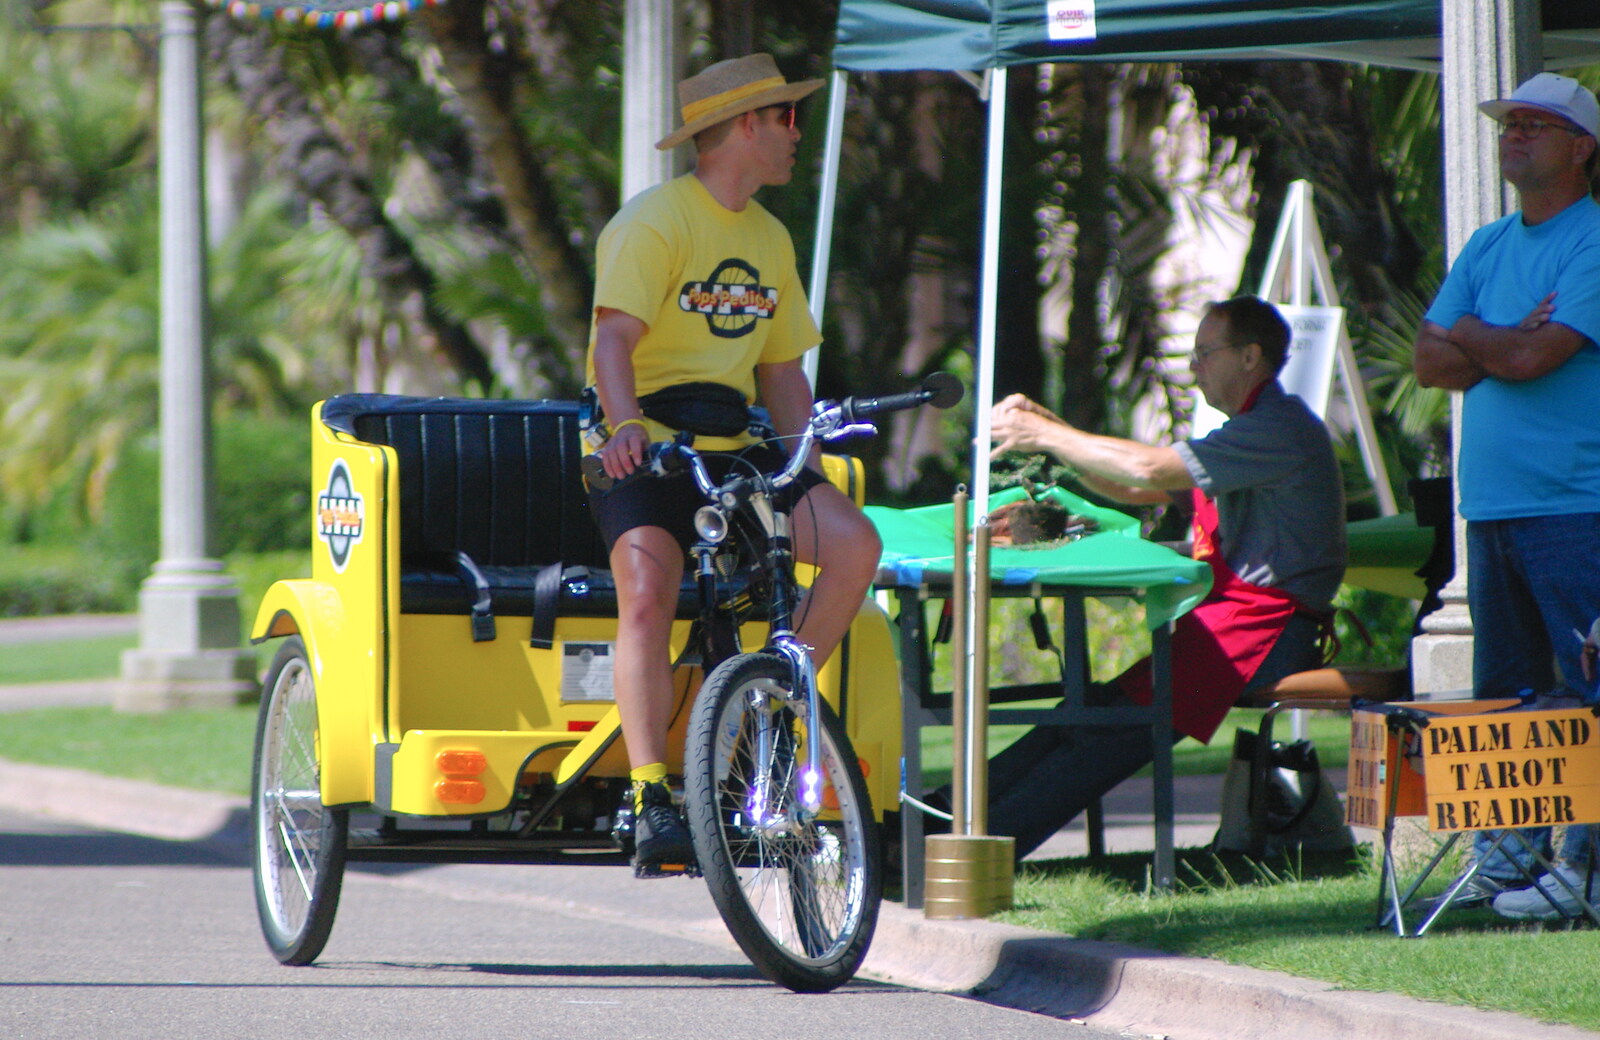 Scenes and People of Balboa Park, San Diego, California - 25th September 2005: A dude on a cycle rickshaw gets a Tarot reading